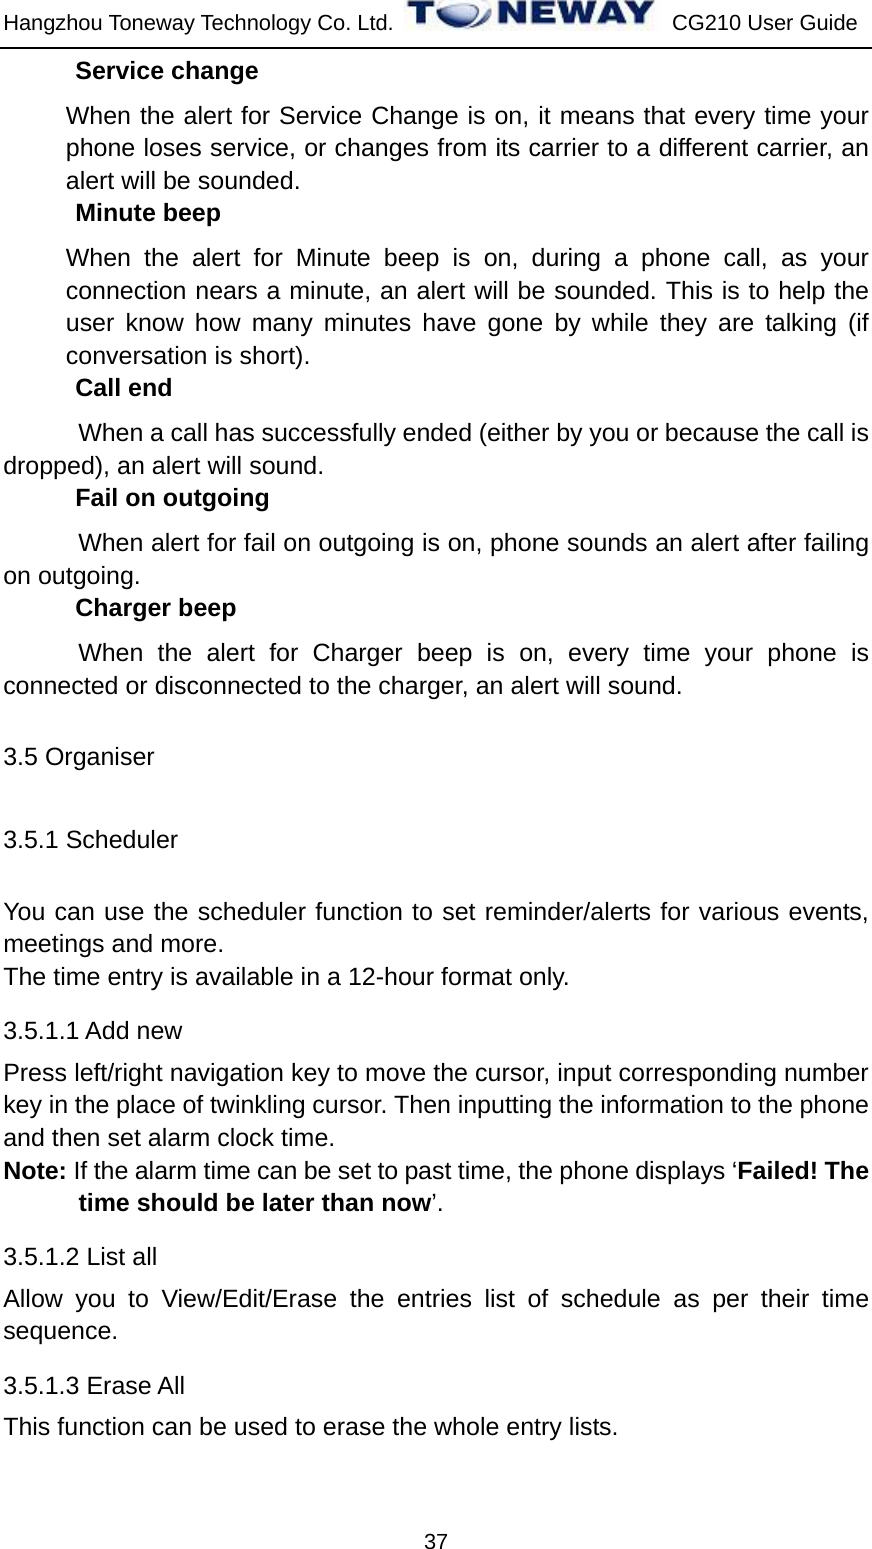 Hangzhou Toneway Technology Co. Ltd.    CG210 User Guide 37 Service change When the alert for Service Change is on, it means that every time your phone loses service, or changes from its carrier to a different carrier, an alert will be sounded. Minute beep When the alert for Minute beep is on, during a phone call, as your connection nears a minute, an alert will be sounded. This is to help the user know how many minutes have gone by while they are talking (if conversation is short). Call end When a call has successfully ended (either by you or because the call is dropped), an alert will sound. Fail on outgoing When alert for fail on outgoing is on, phone sounds an alert after failing on outgoing. Charger beep When the alert for Charger beep is on, every time your phone is connected or disconnected to the charger, an alert will sound. 3.5 Organiser 3.5.1 Scheduler You can use the scheduler function to set reminder/alerts for various events, meetings and more. The time entry is available in a 12-hour format only. 3.5.1.1 Add new Press left/right navigation key to move the cursor, input corresponding number key in the place of twinkling cursor. Then inputting the information to the phone and then set alarm clock time.   Note: If the alarm time can be set to past time, the phone displays ‘Failed! The time should be later than now’. 3.5.1.2 List all Allow you to View/Edit/Erase the entries list of schedule as per their time sequence. 3.5.1.3 Erase All This function can be used to erase the whole entry lists. 